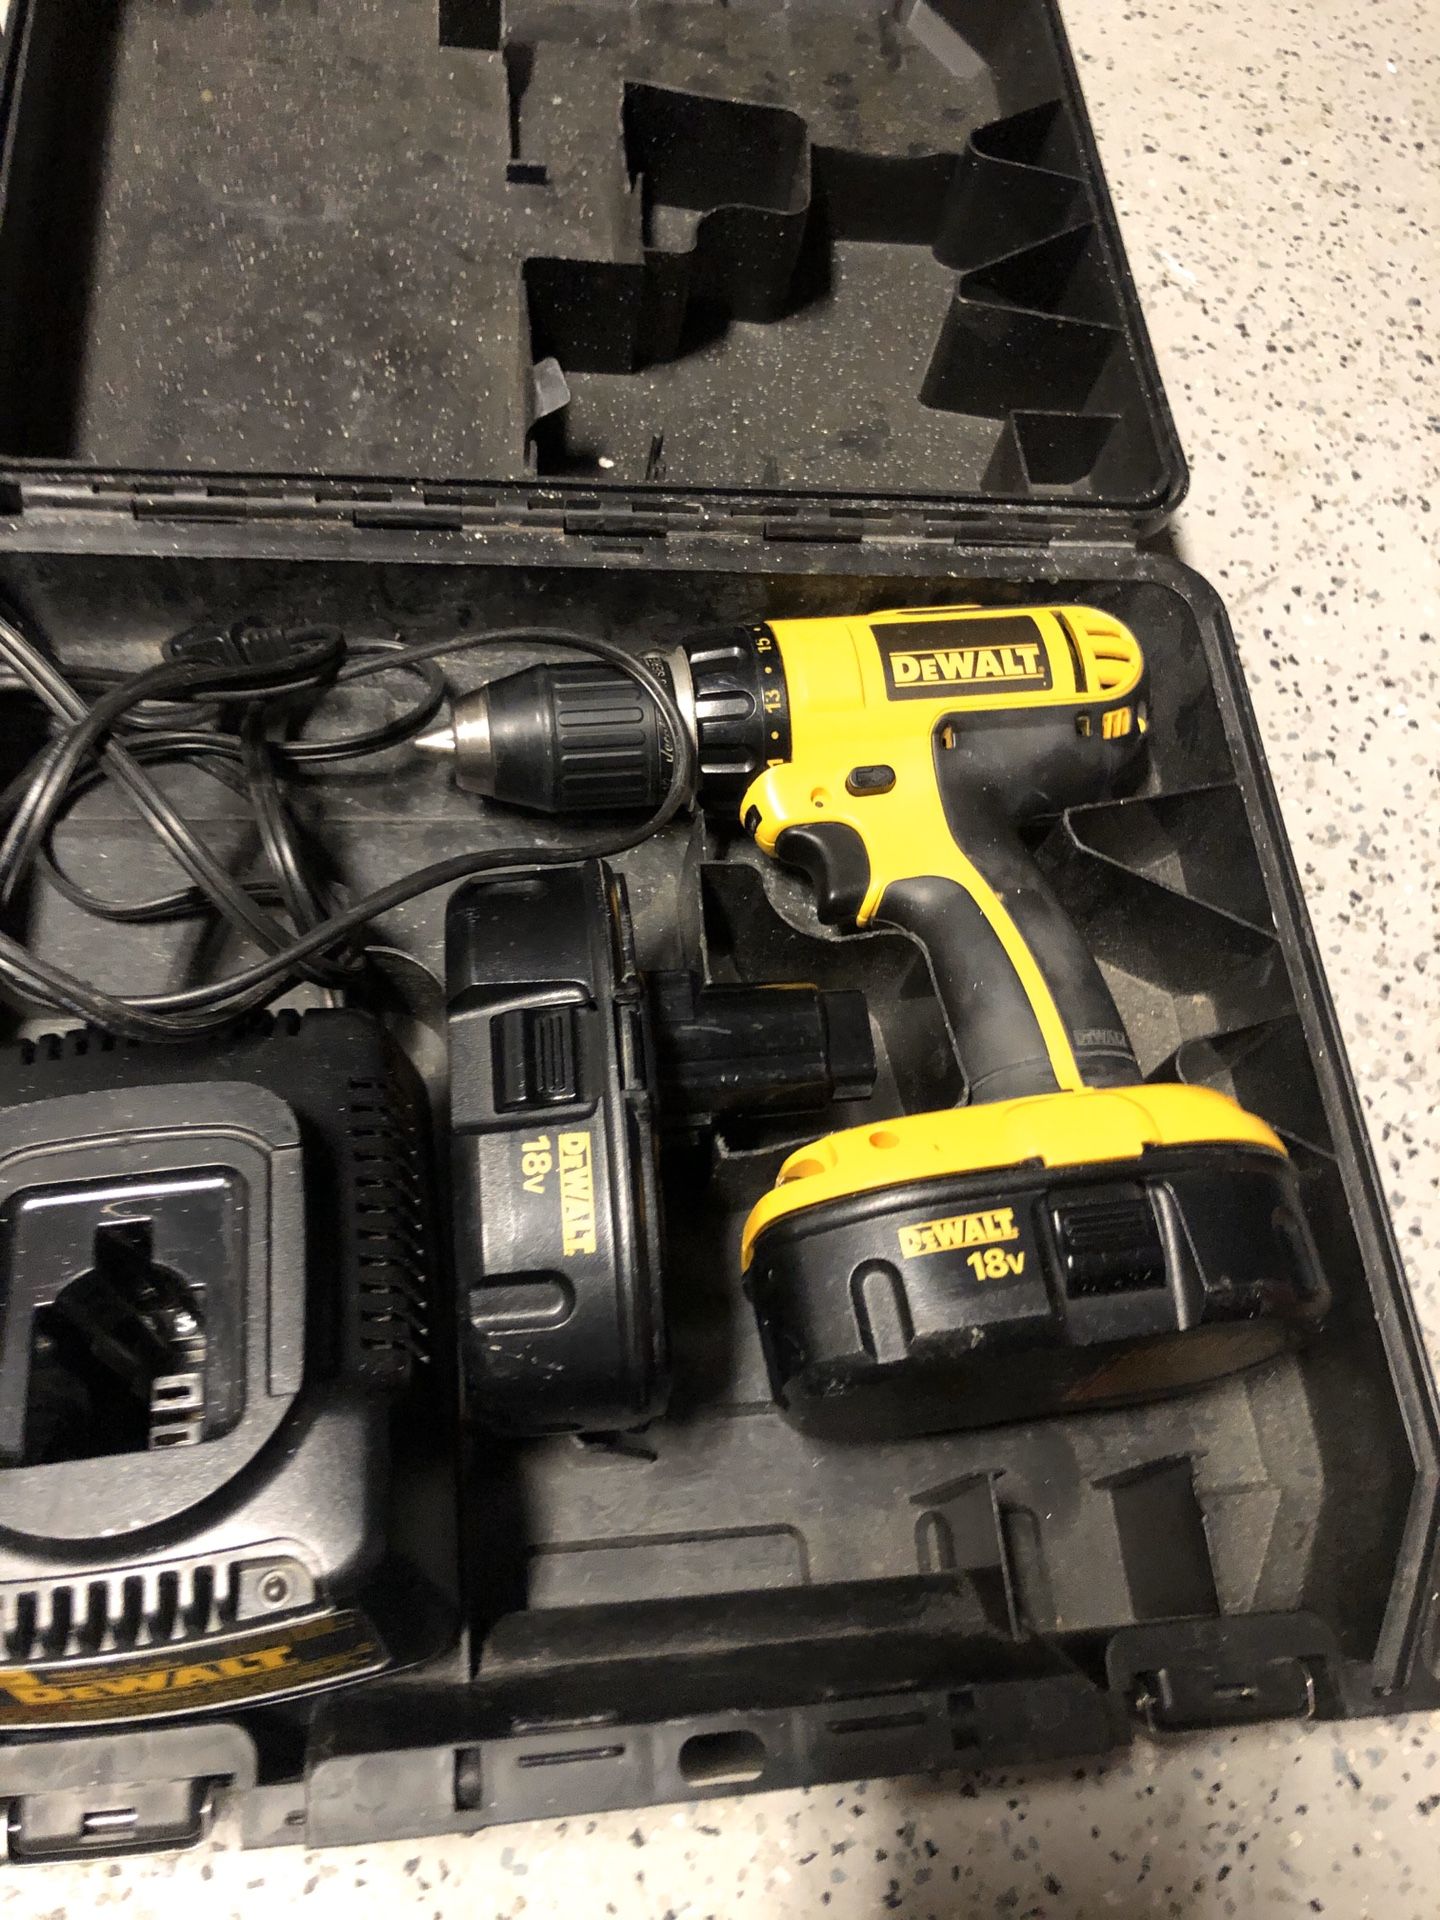 Dewalt Drill with charger and batteries